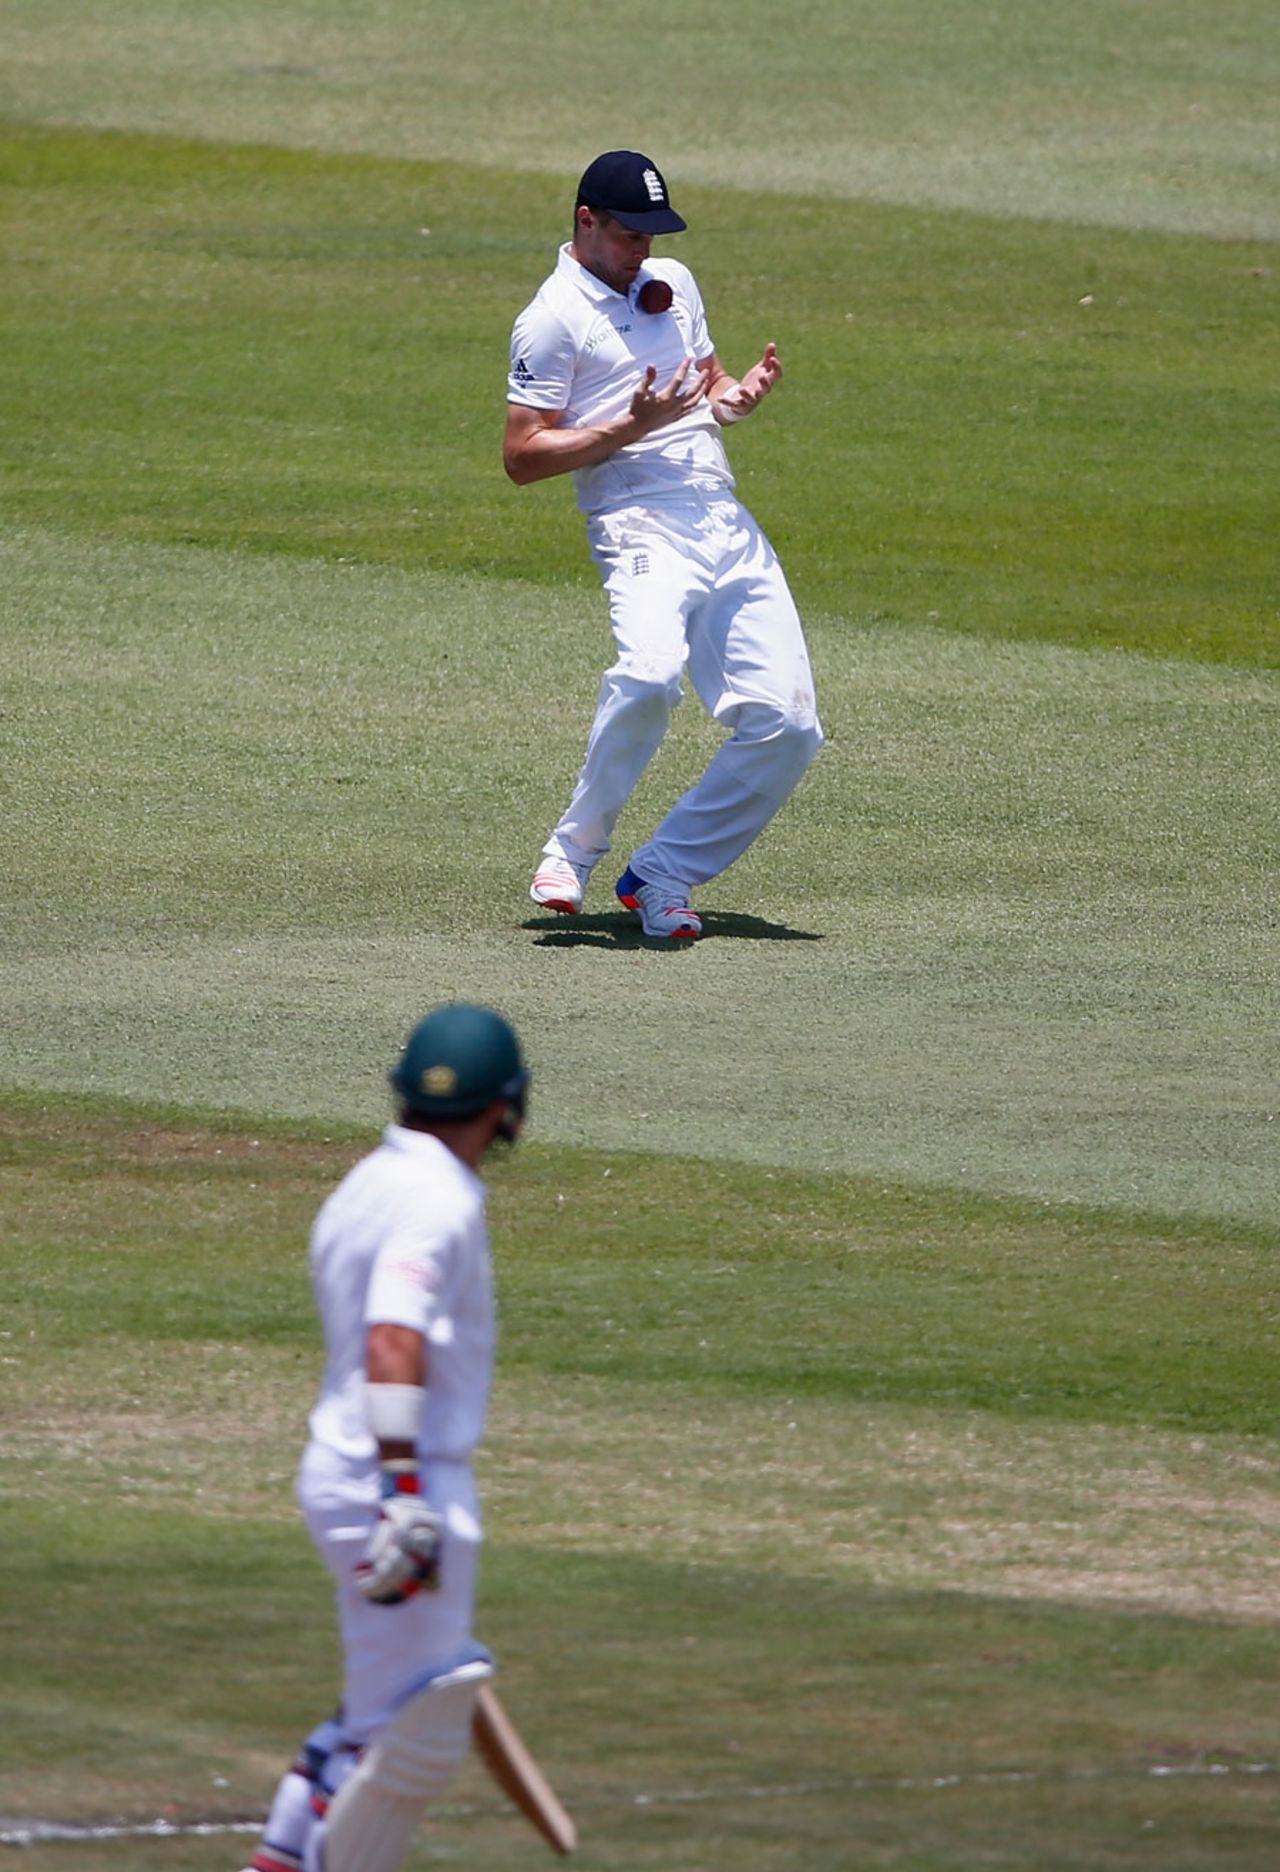 Chris Woakes juggles a catch to dismiss Dale Steyn, South Africa v England, 1st Test, Durban, 3rd day, December 28, 2015